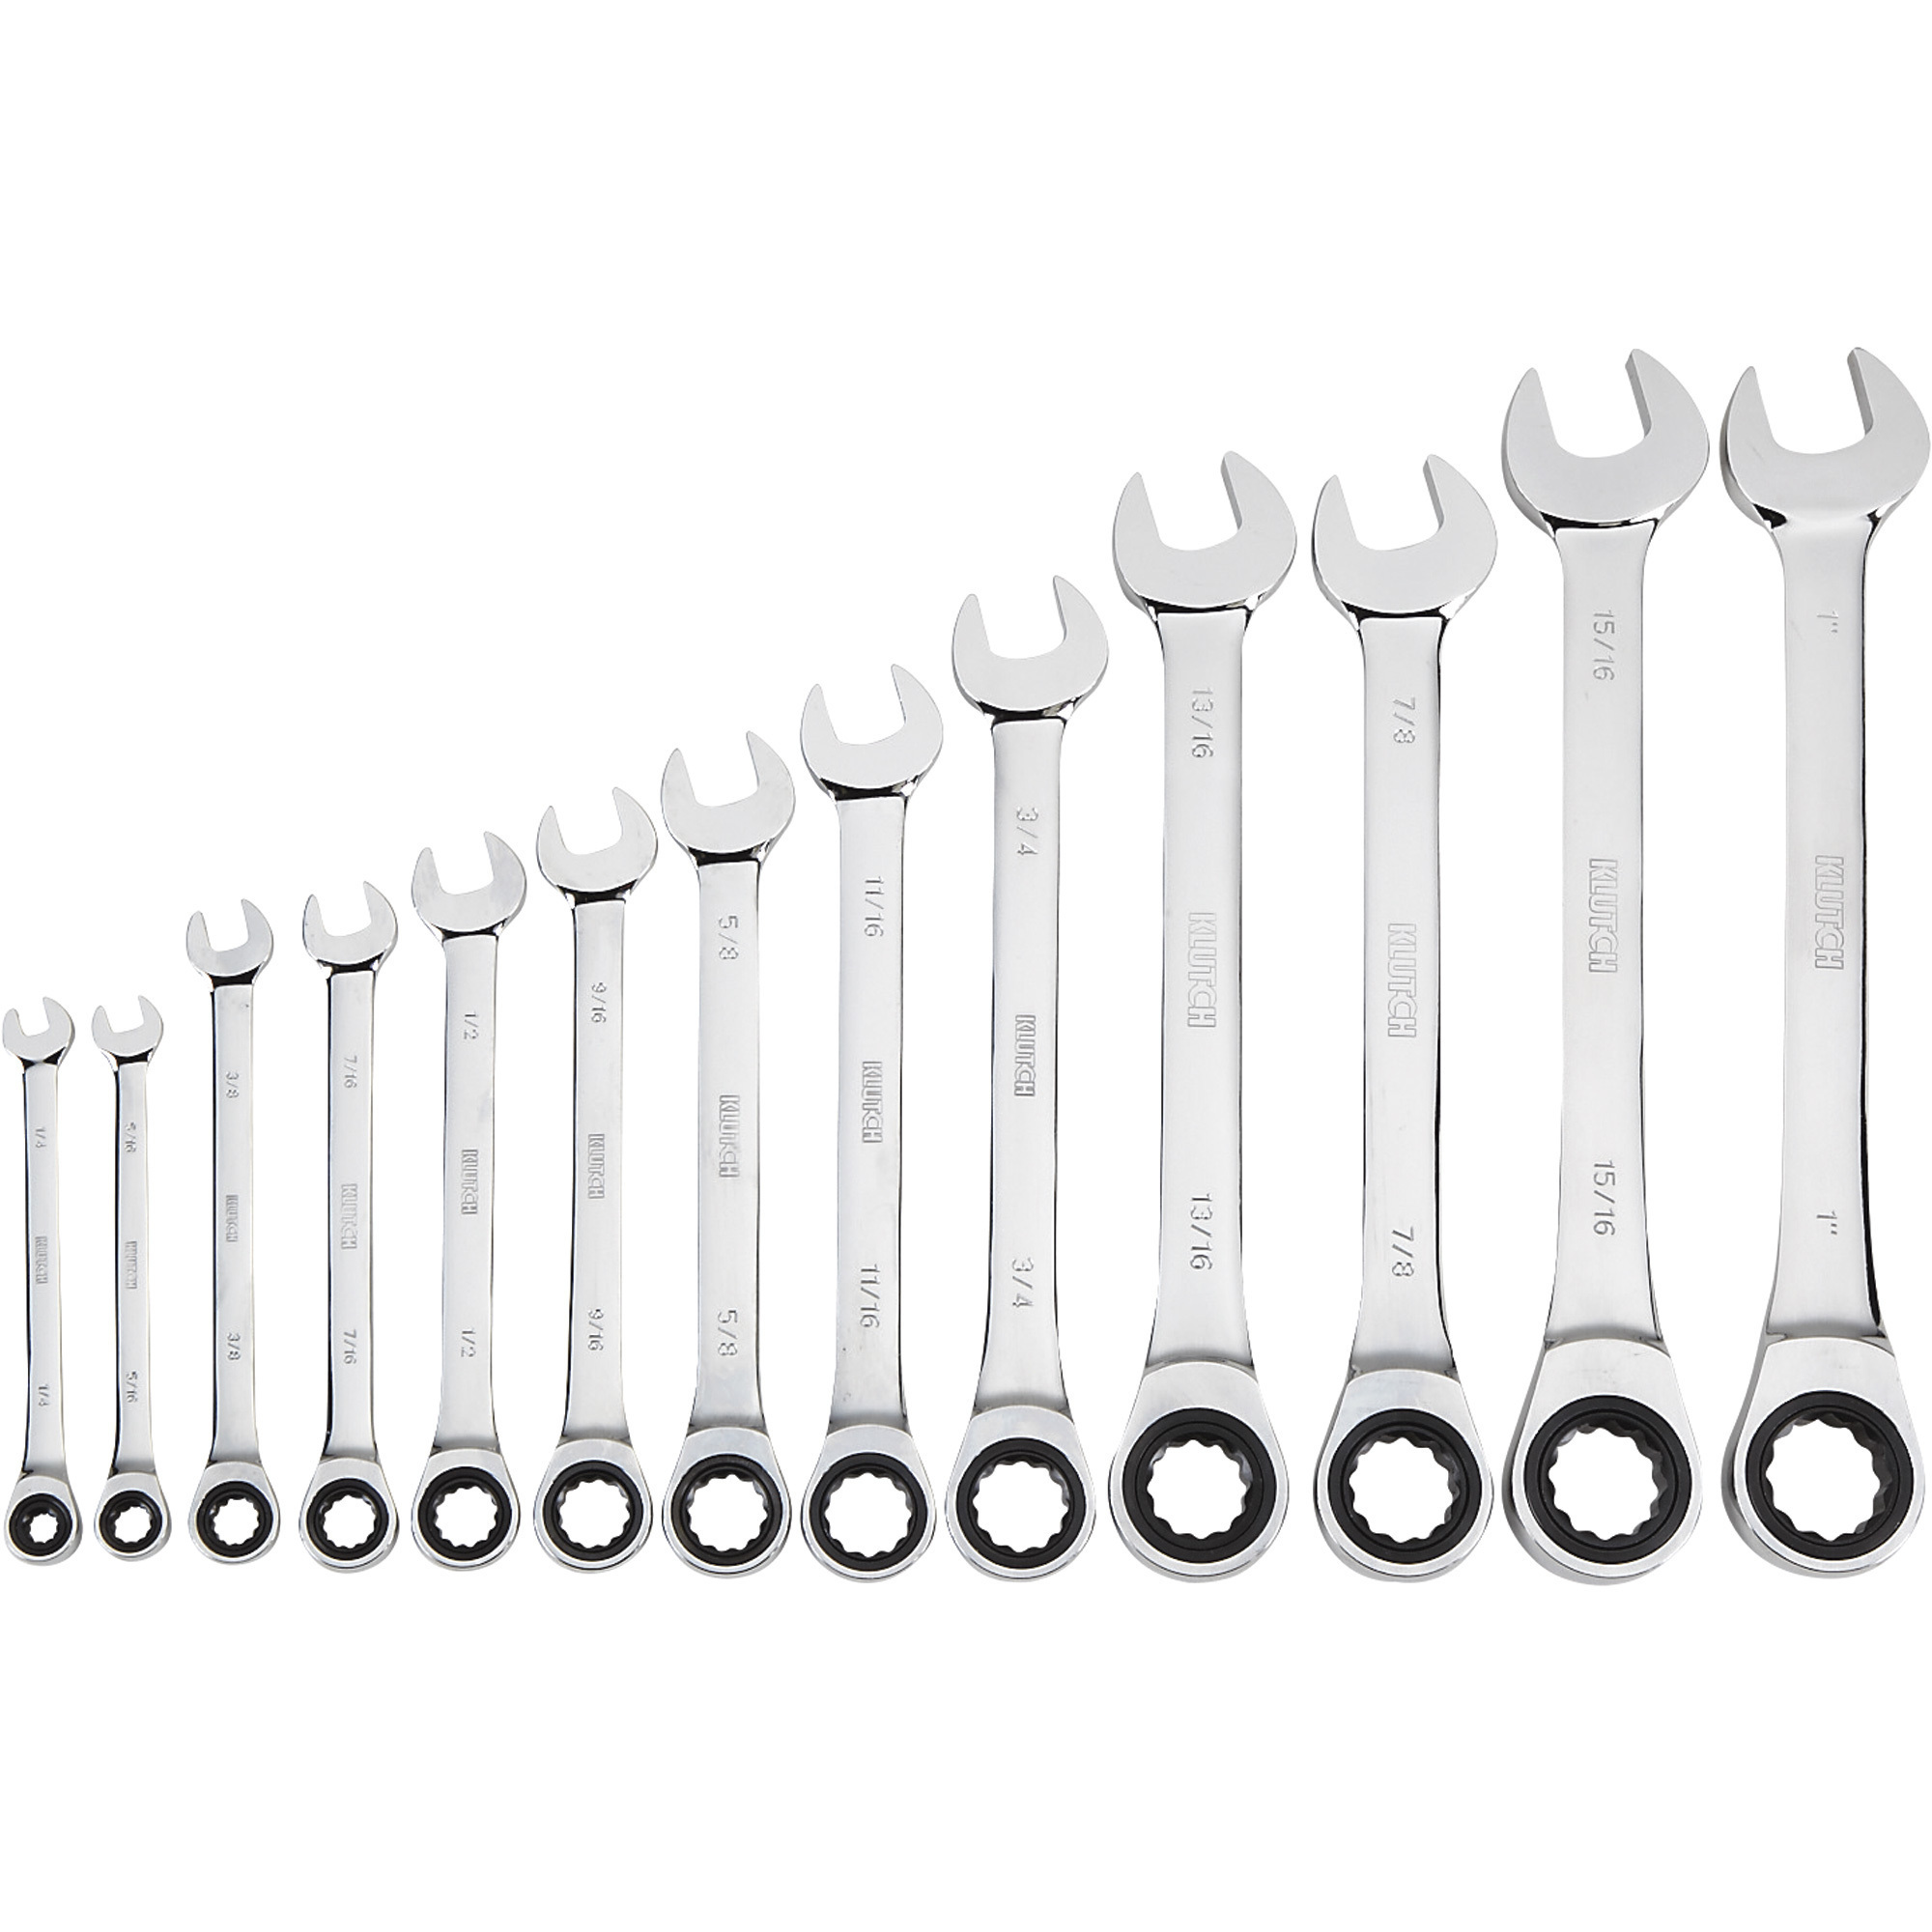 Klutch Ratcheting Wrench Set, 13-Piece, SAE: 1/4Inch-1Inch